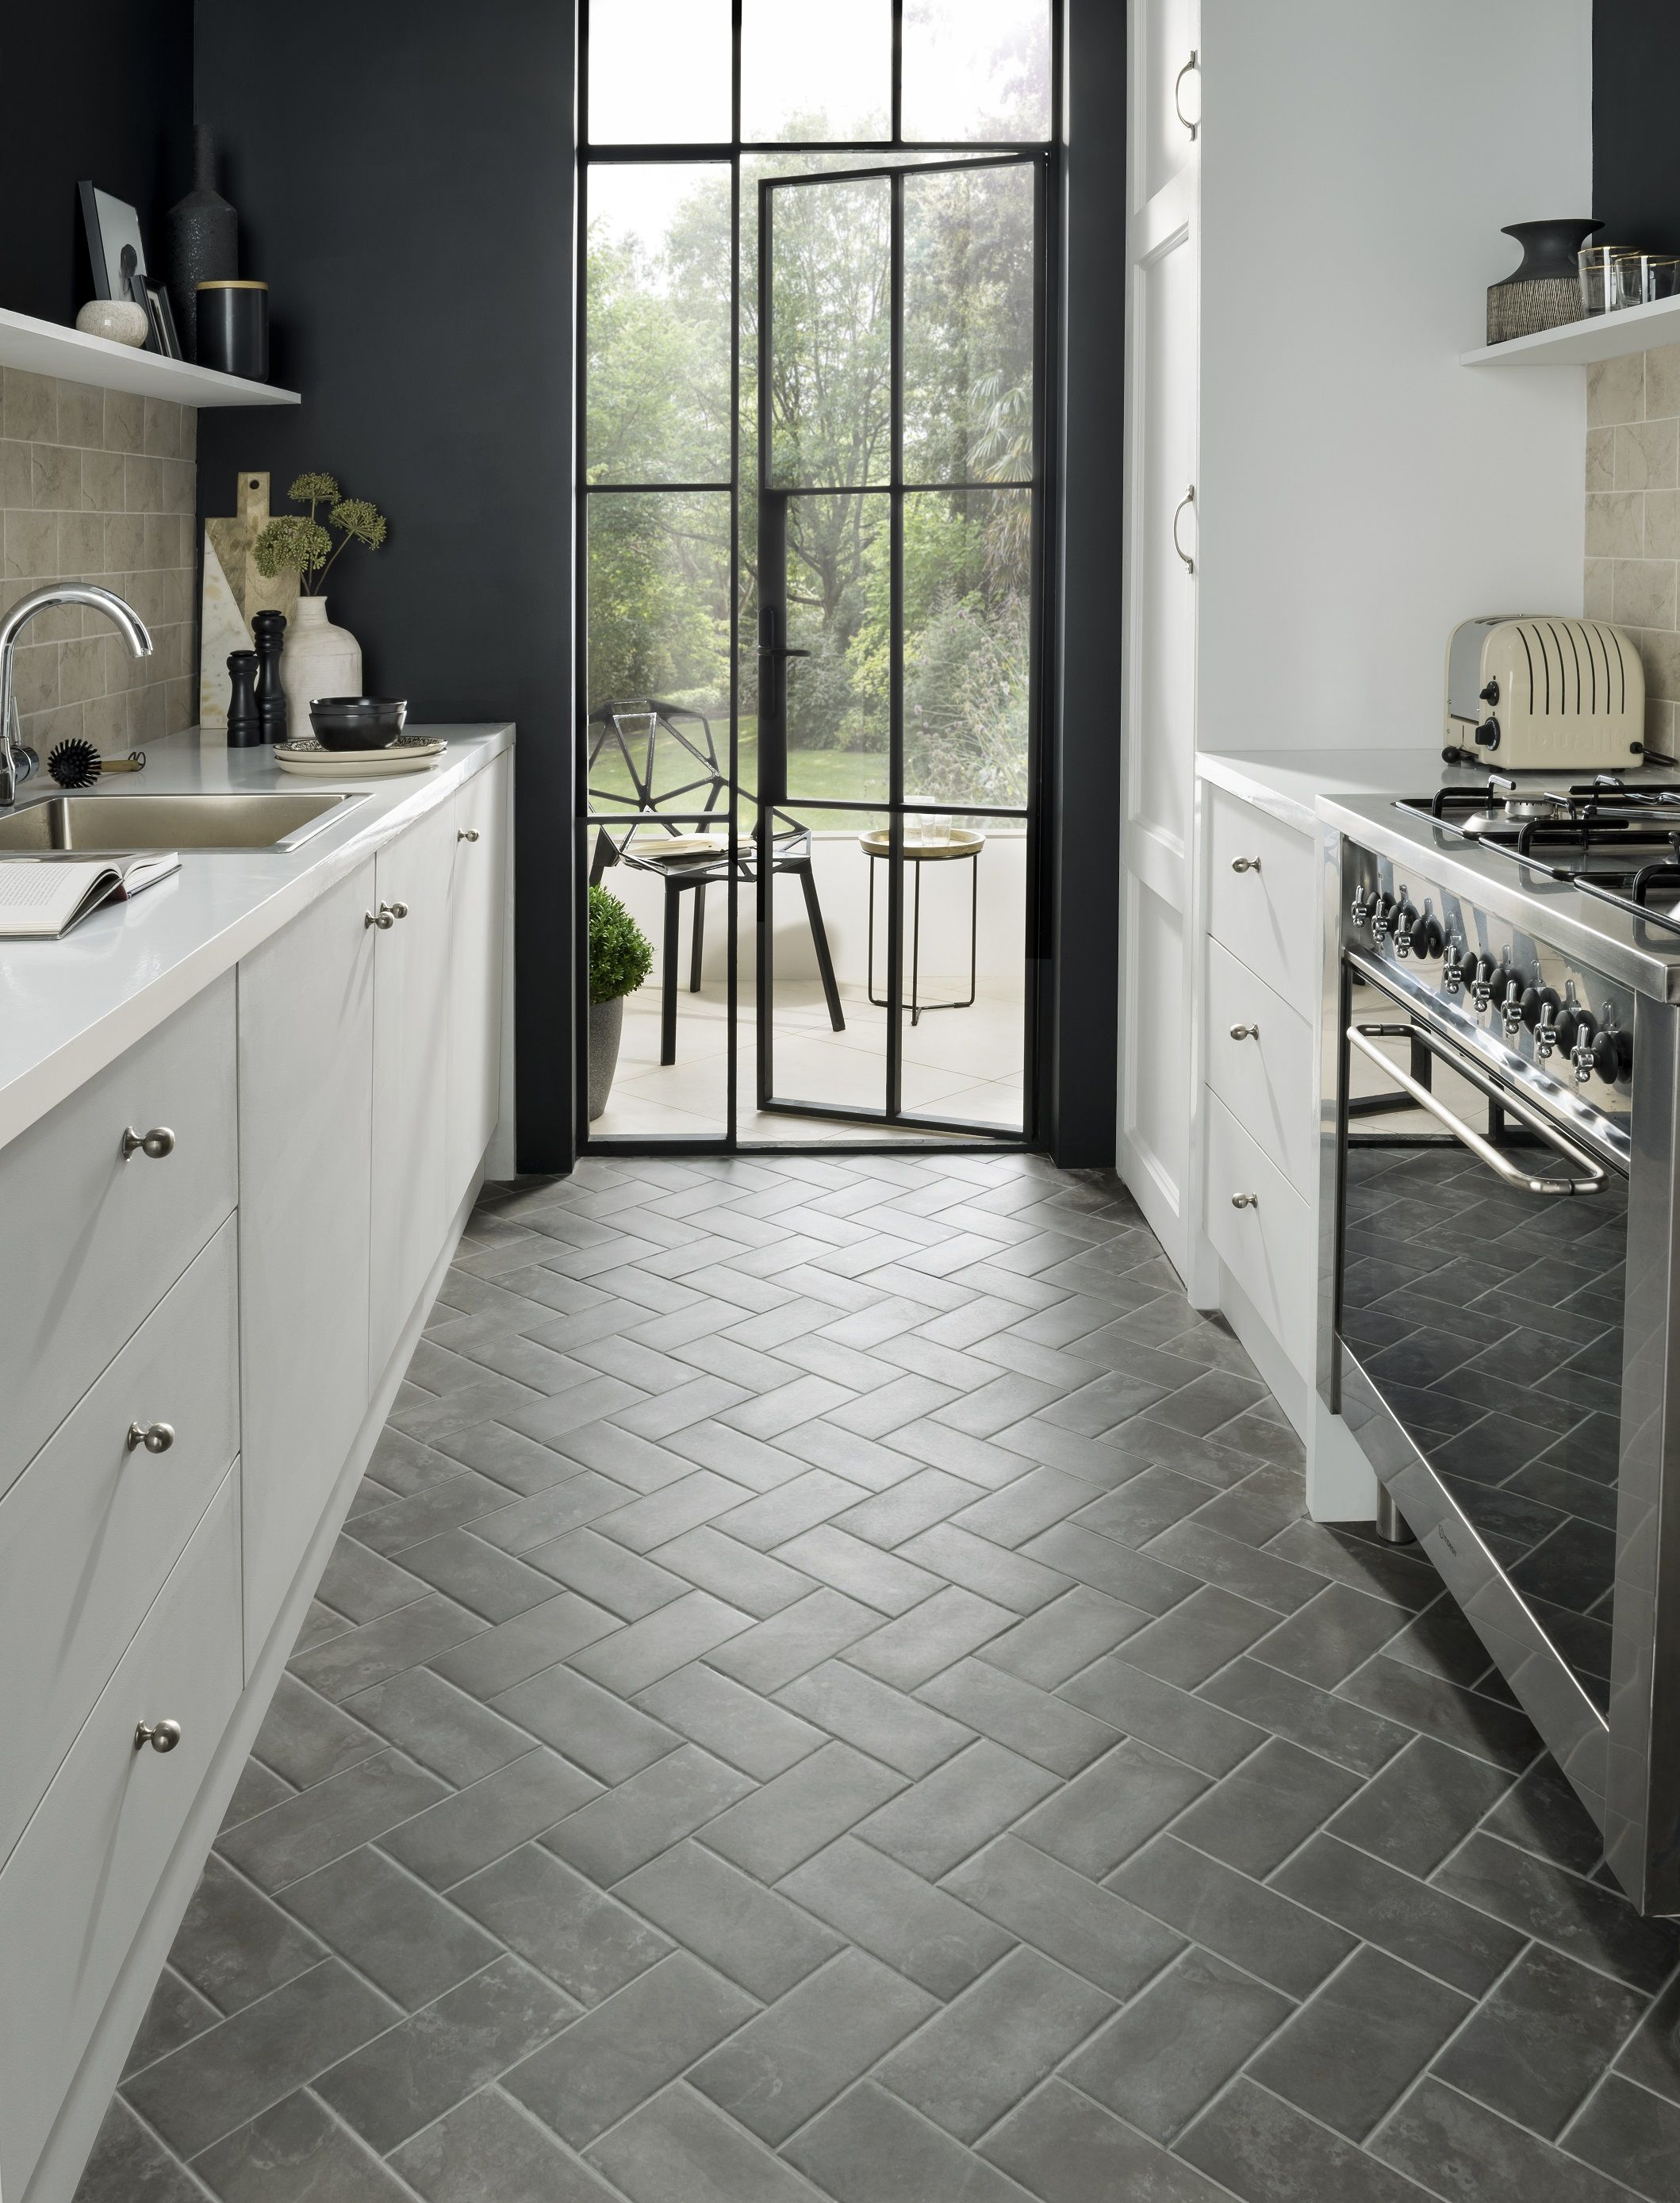 11 Tile Design Ideas To Make A Small Kitchen Feel Bigger with regard to dimensions 2118 X 2777